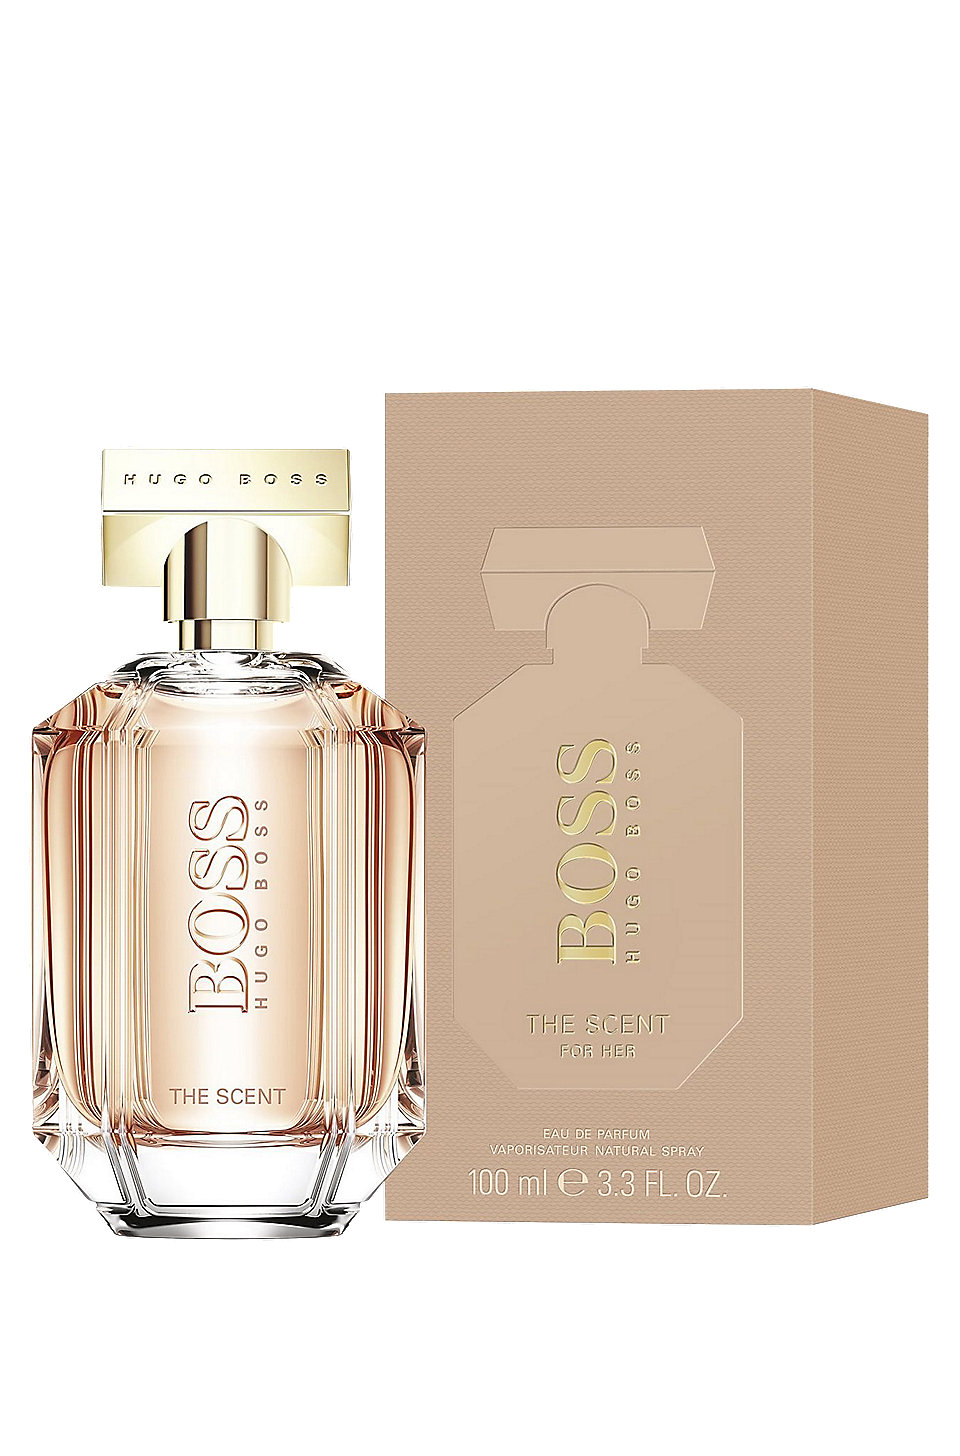 Boss for her парфюмерная вода. Хуго босс the Scent for her. Hugo Boss the Scent Pure Accord for her. Hugo Boss the Scent for her (100 мл.). Boss the Scent Eau de Toilette 100ml.